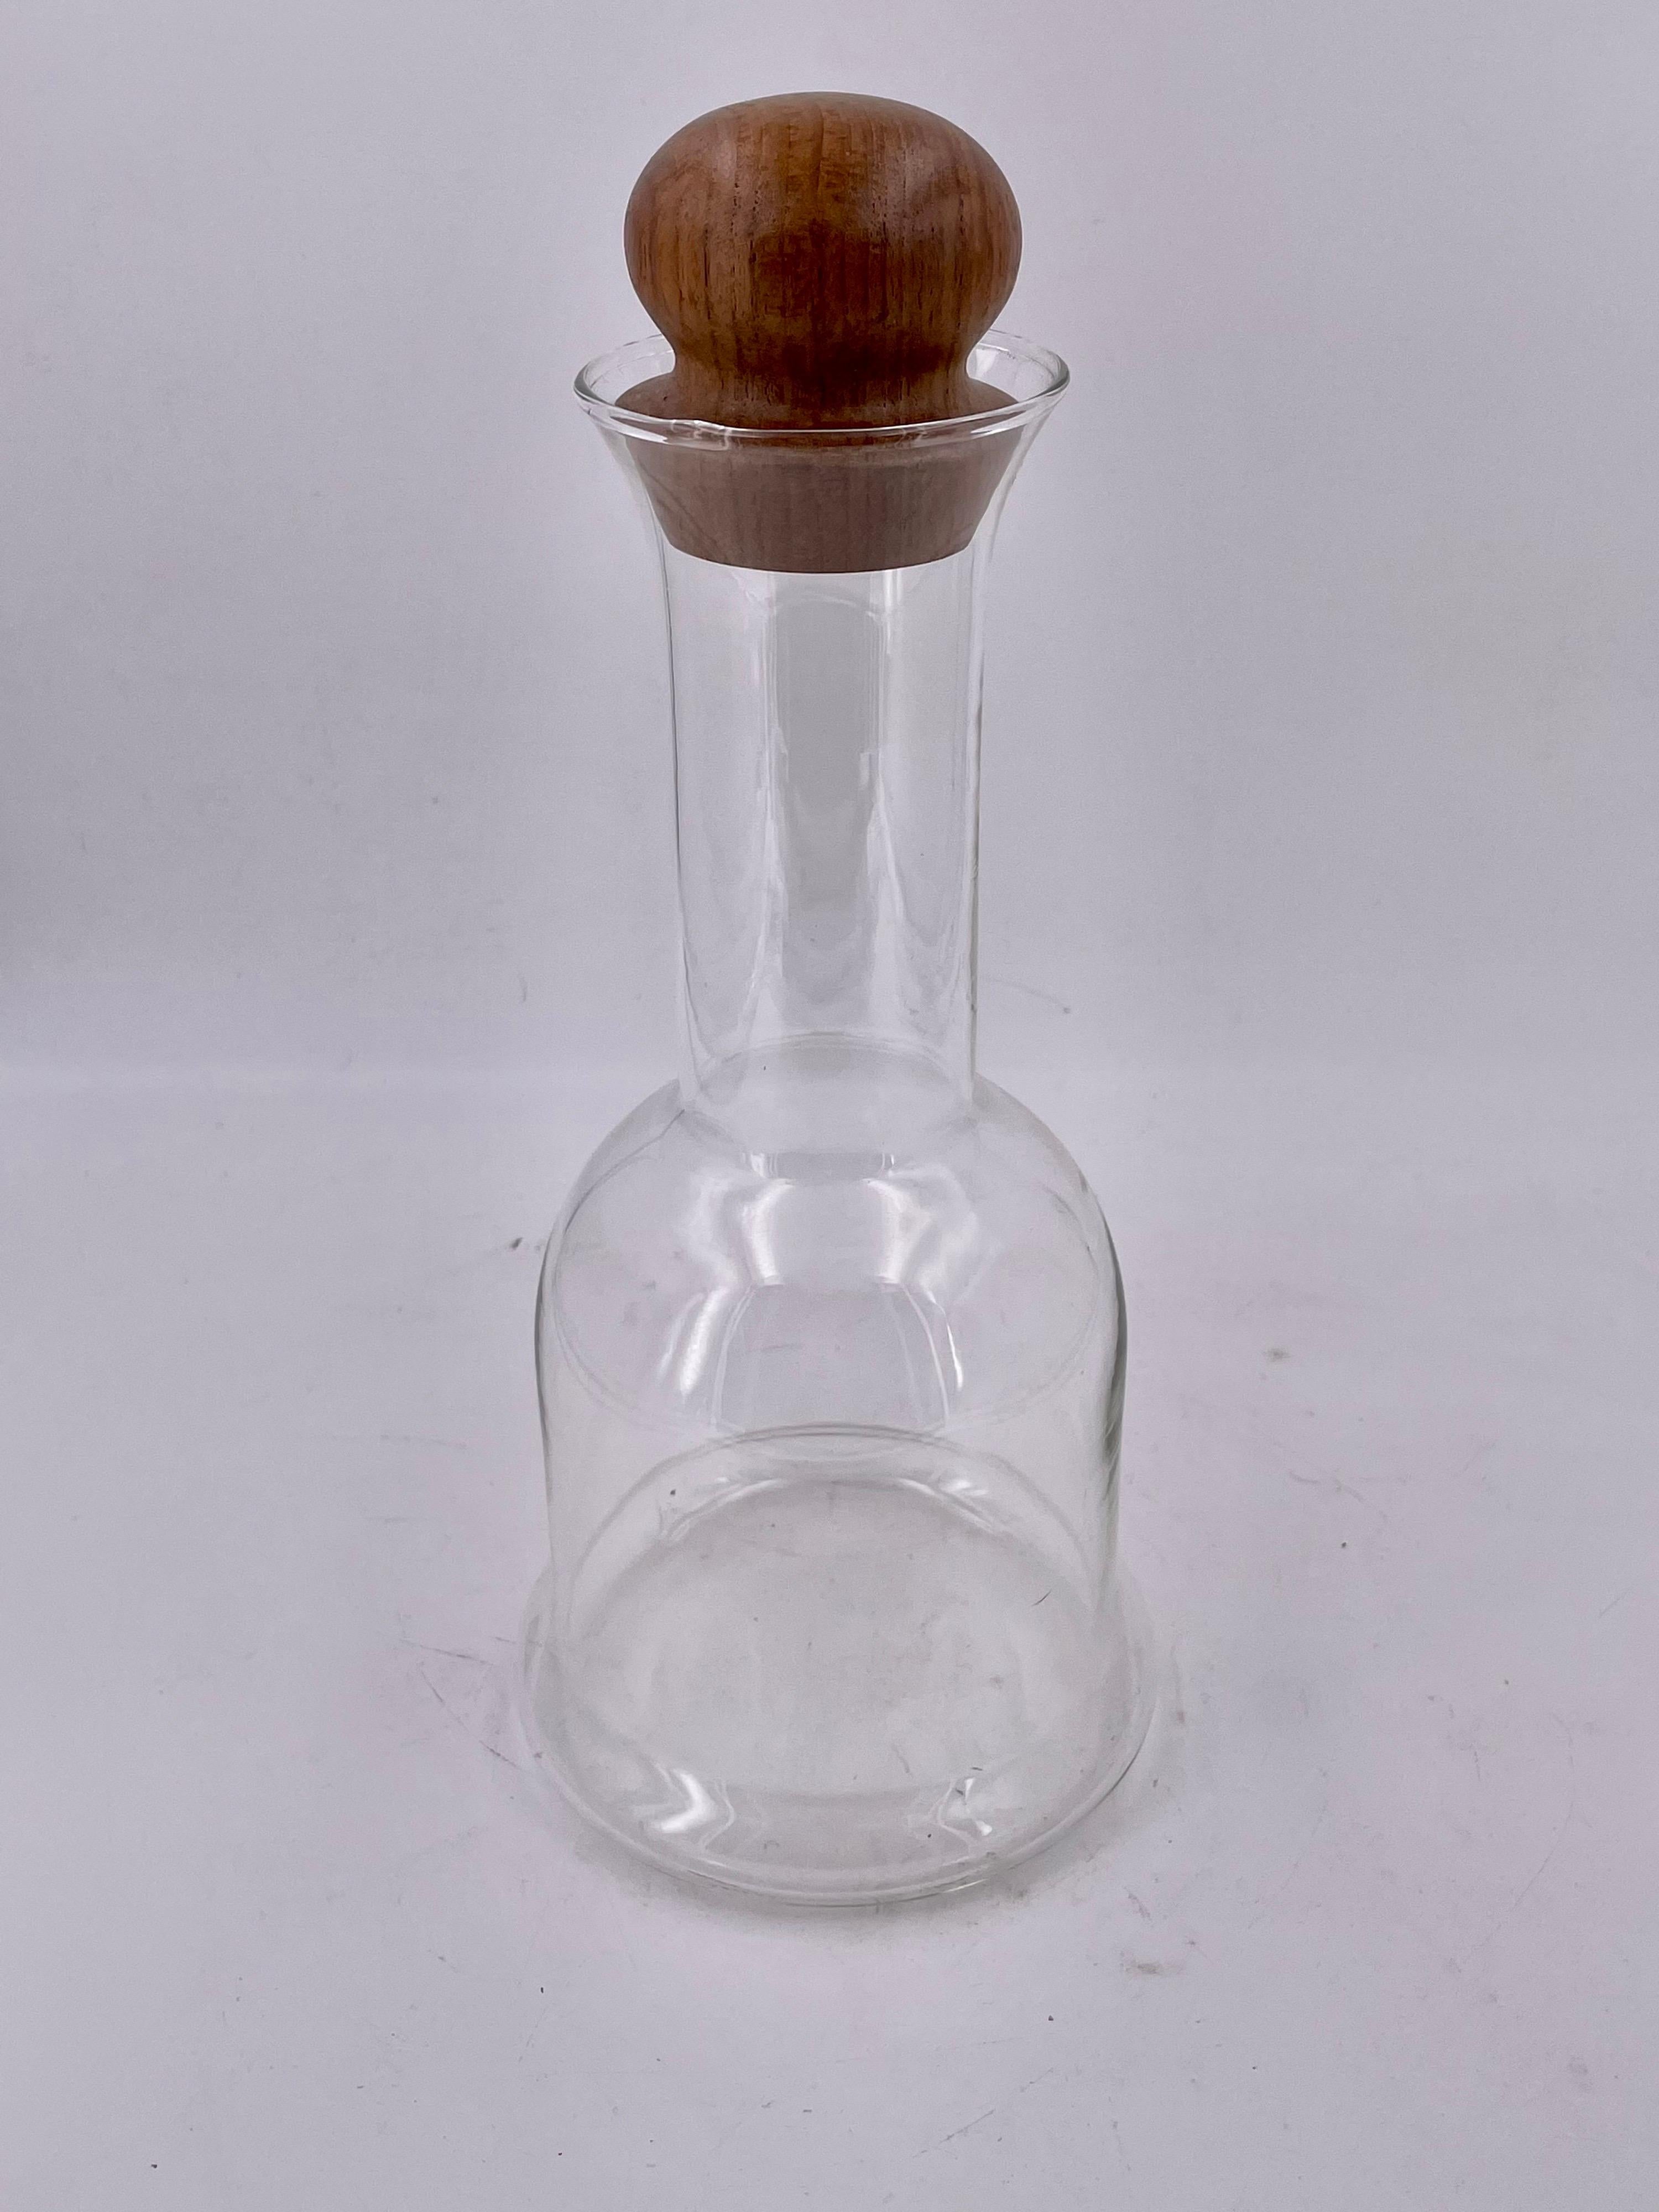 Beautiful glass wine carafe decanter designed by Gunnar Cyren, circa 1960s in excellent condition never used with solid teak stopper.